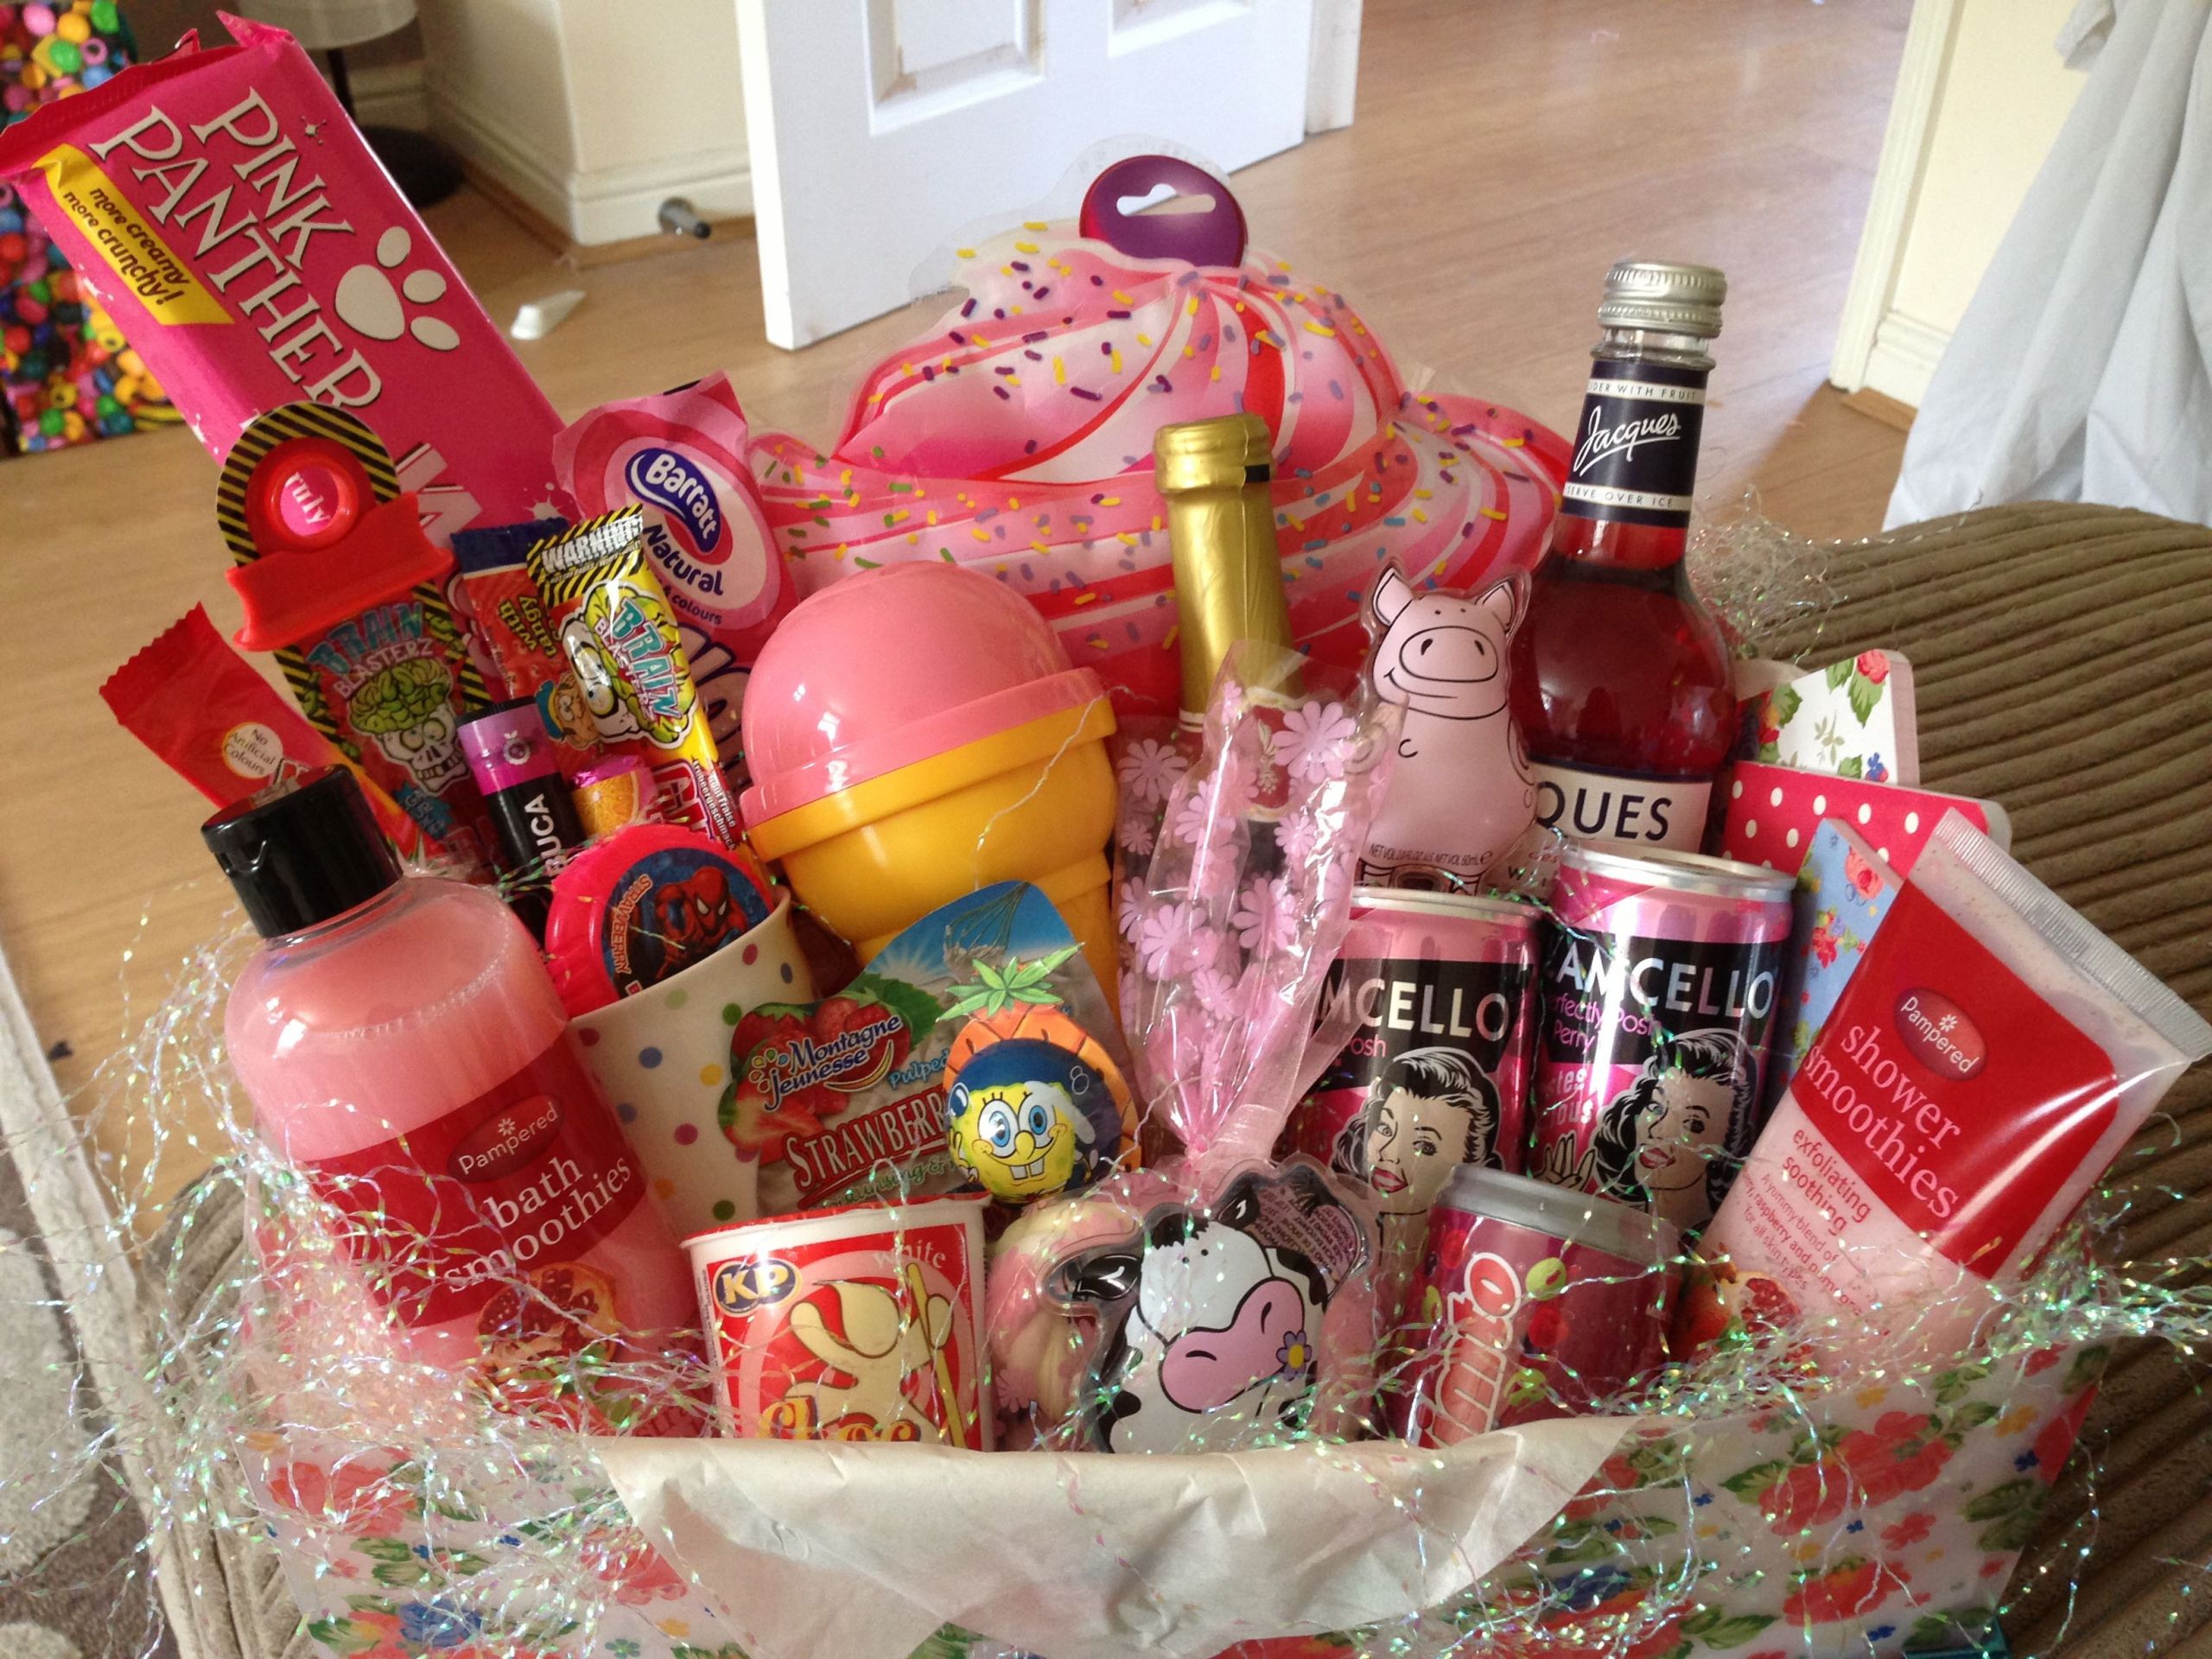 Ladies Night Out Gift Basket Ideas
 Girly hamper for girls night in Given to a good friend